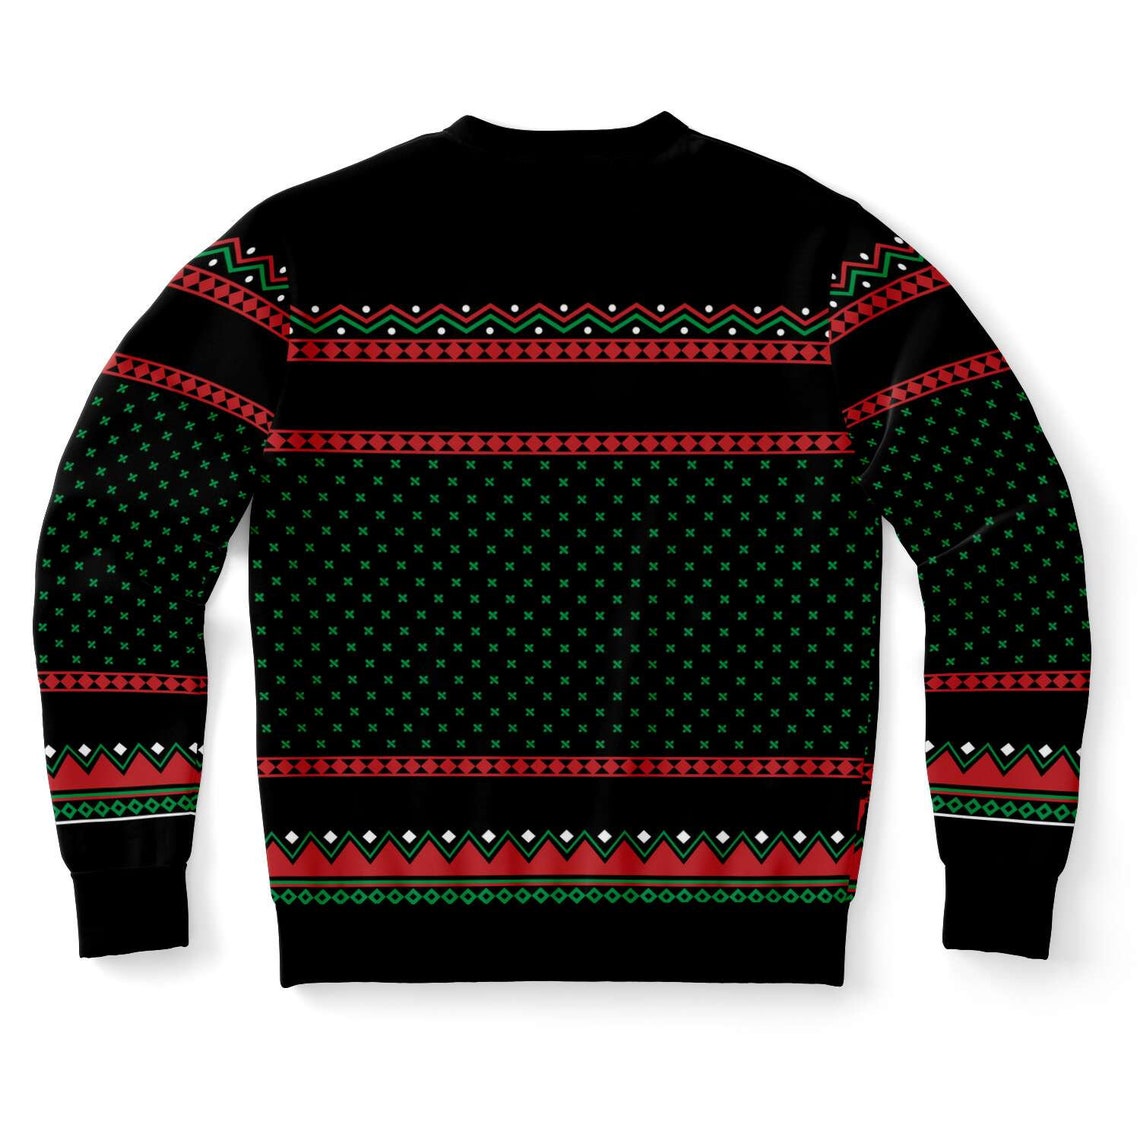 Ugly Christmas Sweater, You Sink It